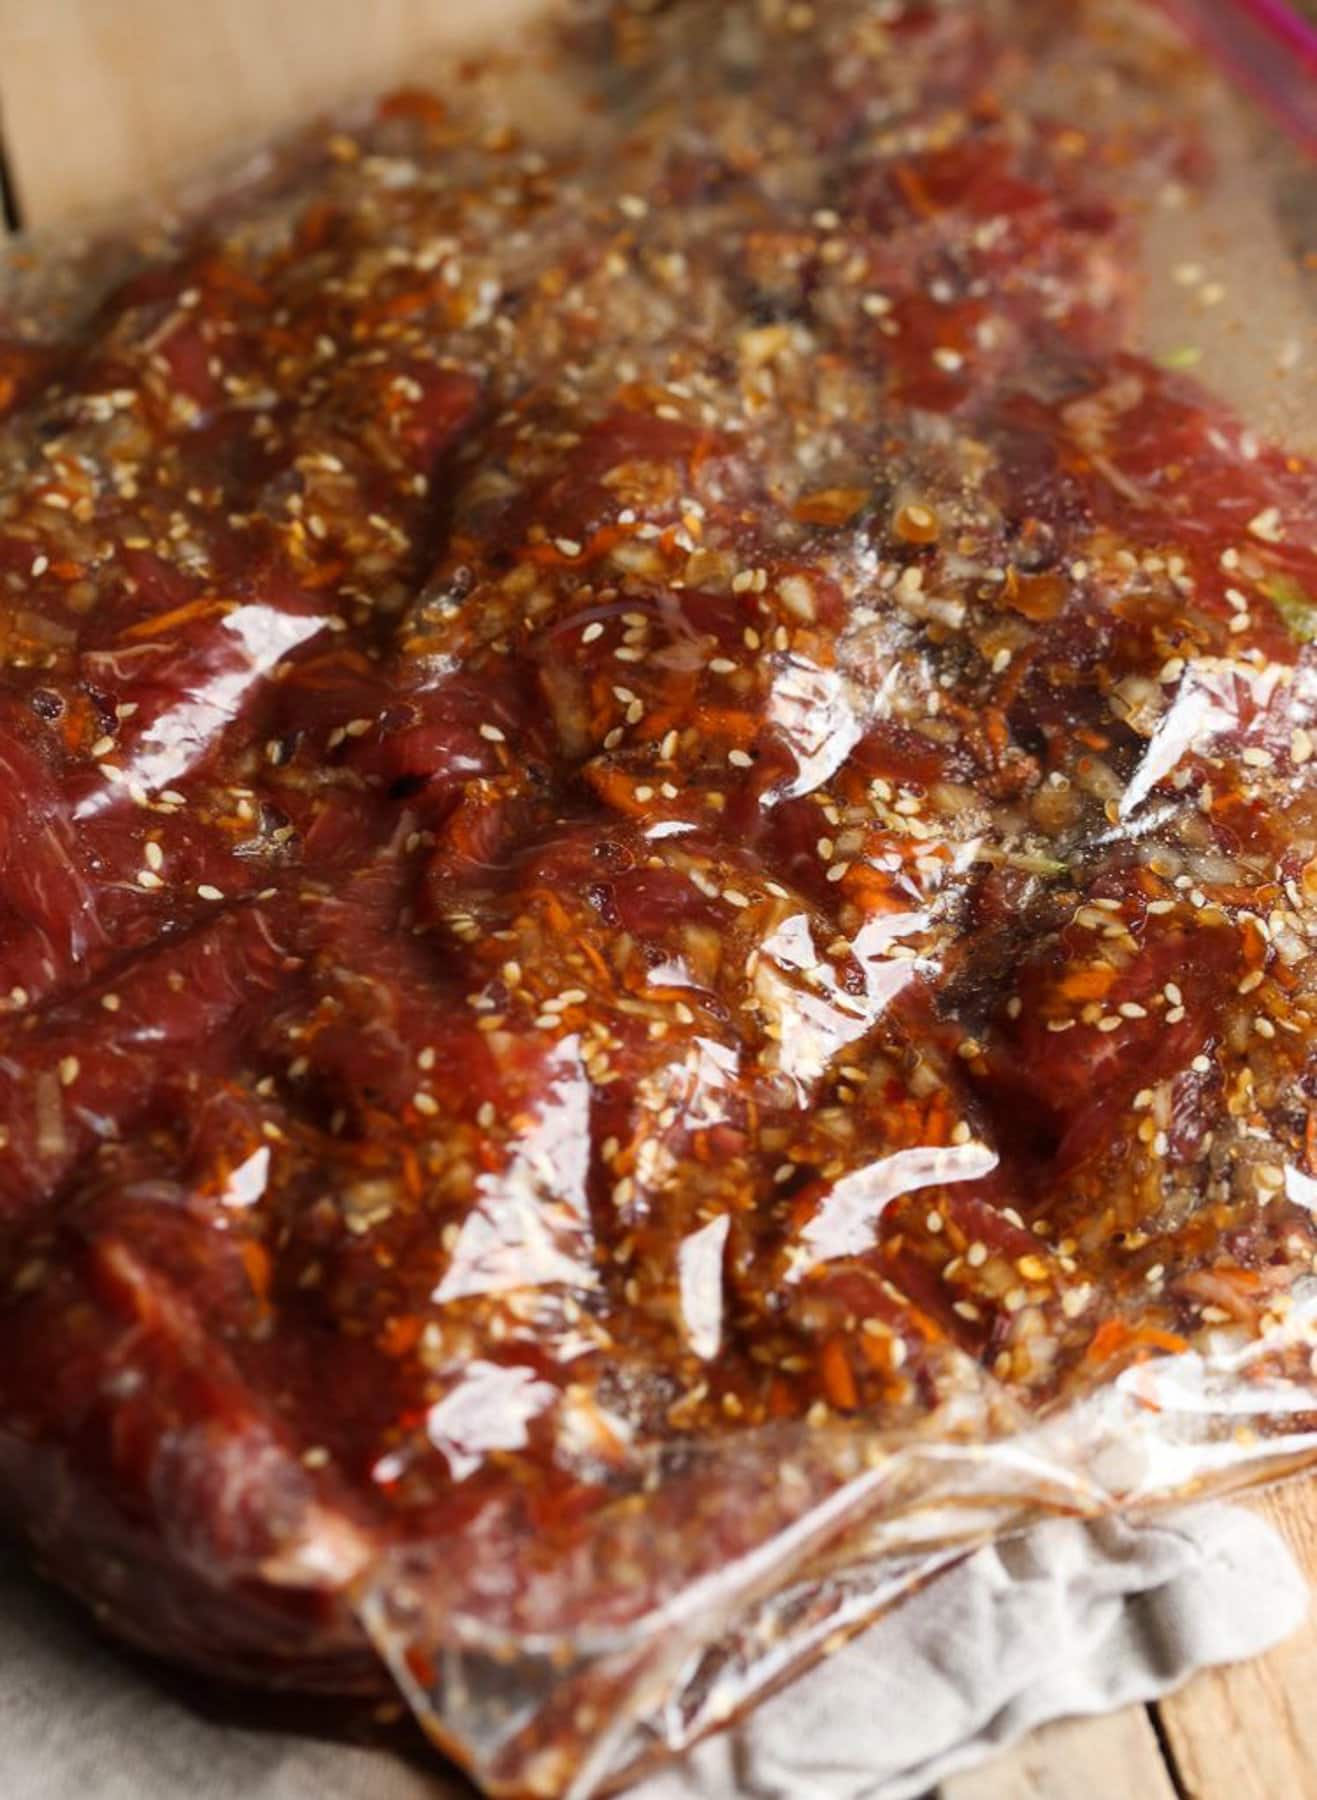 Lean meat with pepper and garlic marinade